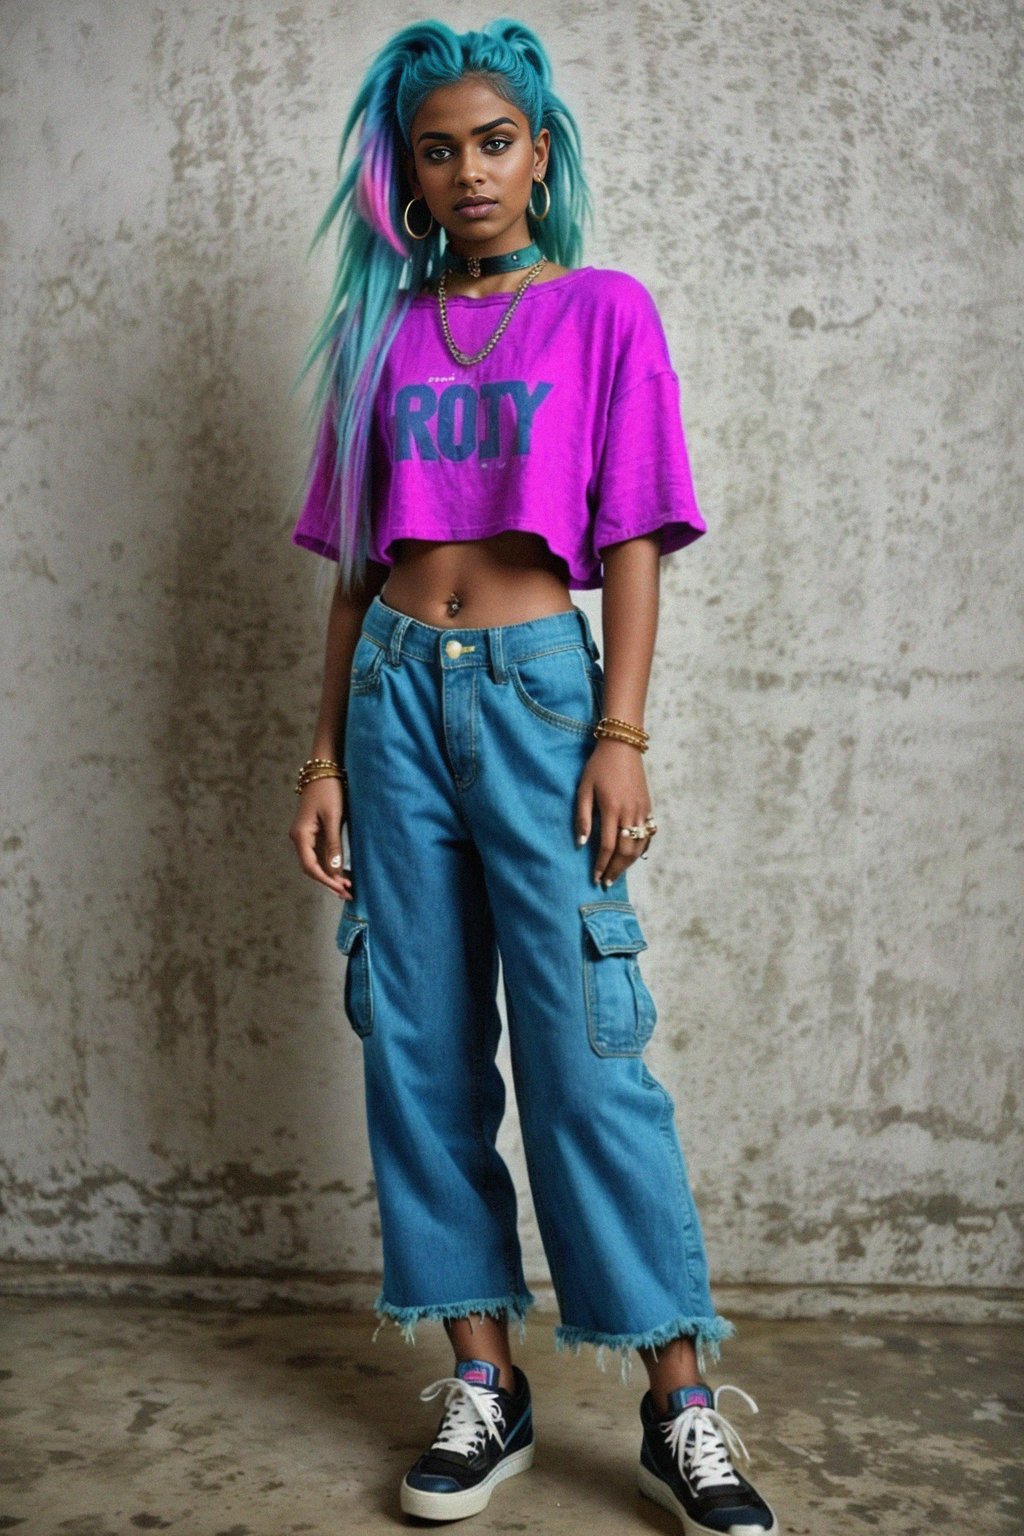 woman wearing Y2K aesthetic, 2000s fashion, aughts style, noughties style, grunge or 2000s style, oversized washed out style, baggy pants, low rise pants or cargo pants, crop top, Choker, Metallic, iridescent fabrics, posing for photo